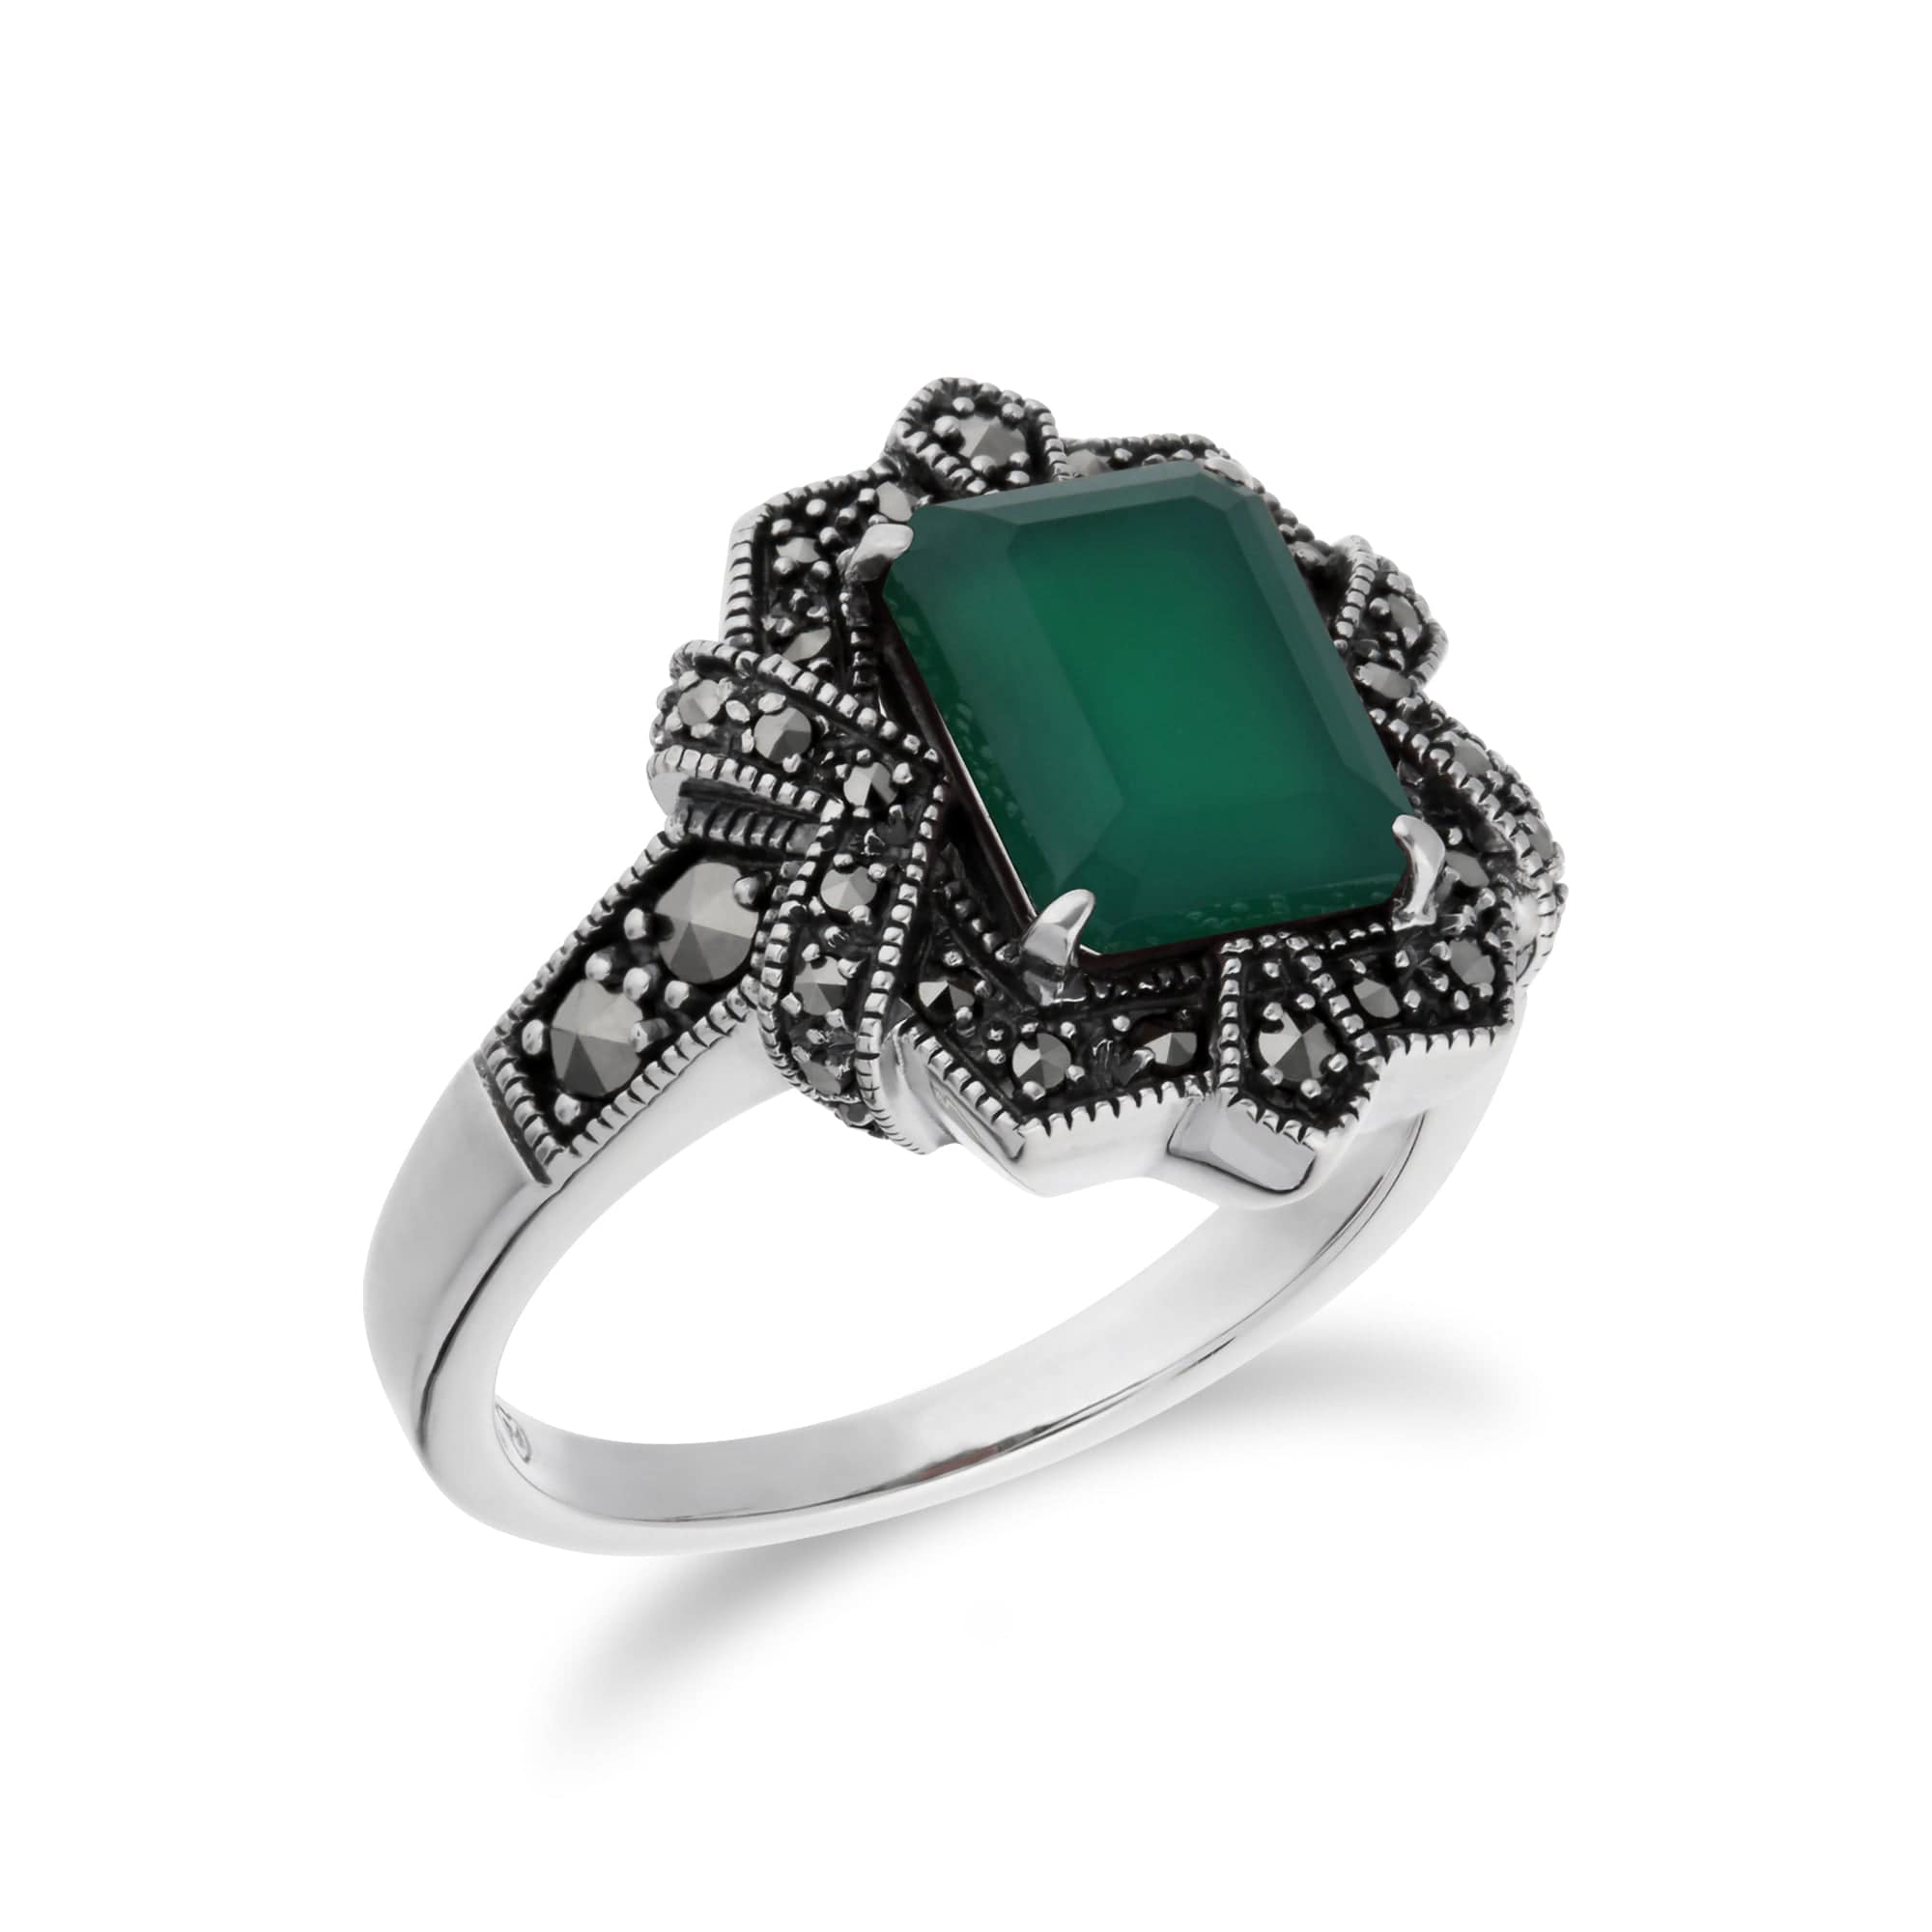 214R570809925 Art Deco Style Baguette Green Chalcedony & Marcasite Ring in 925 Sterling Silver 3